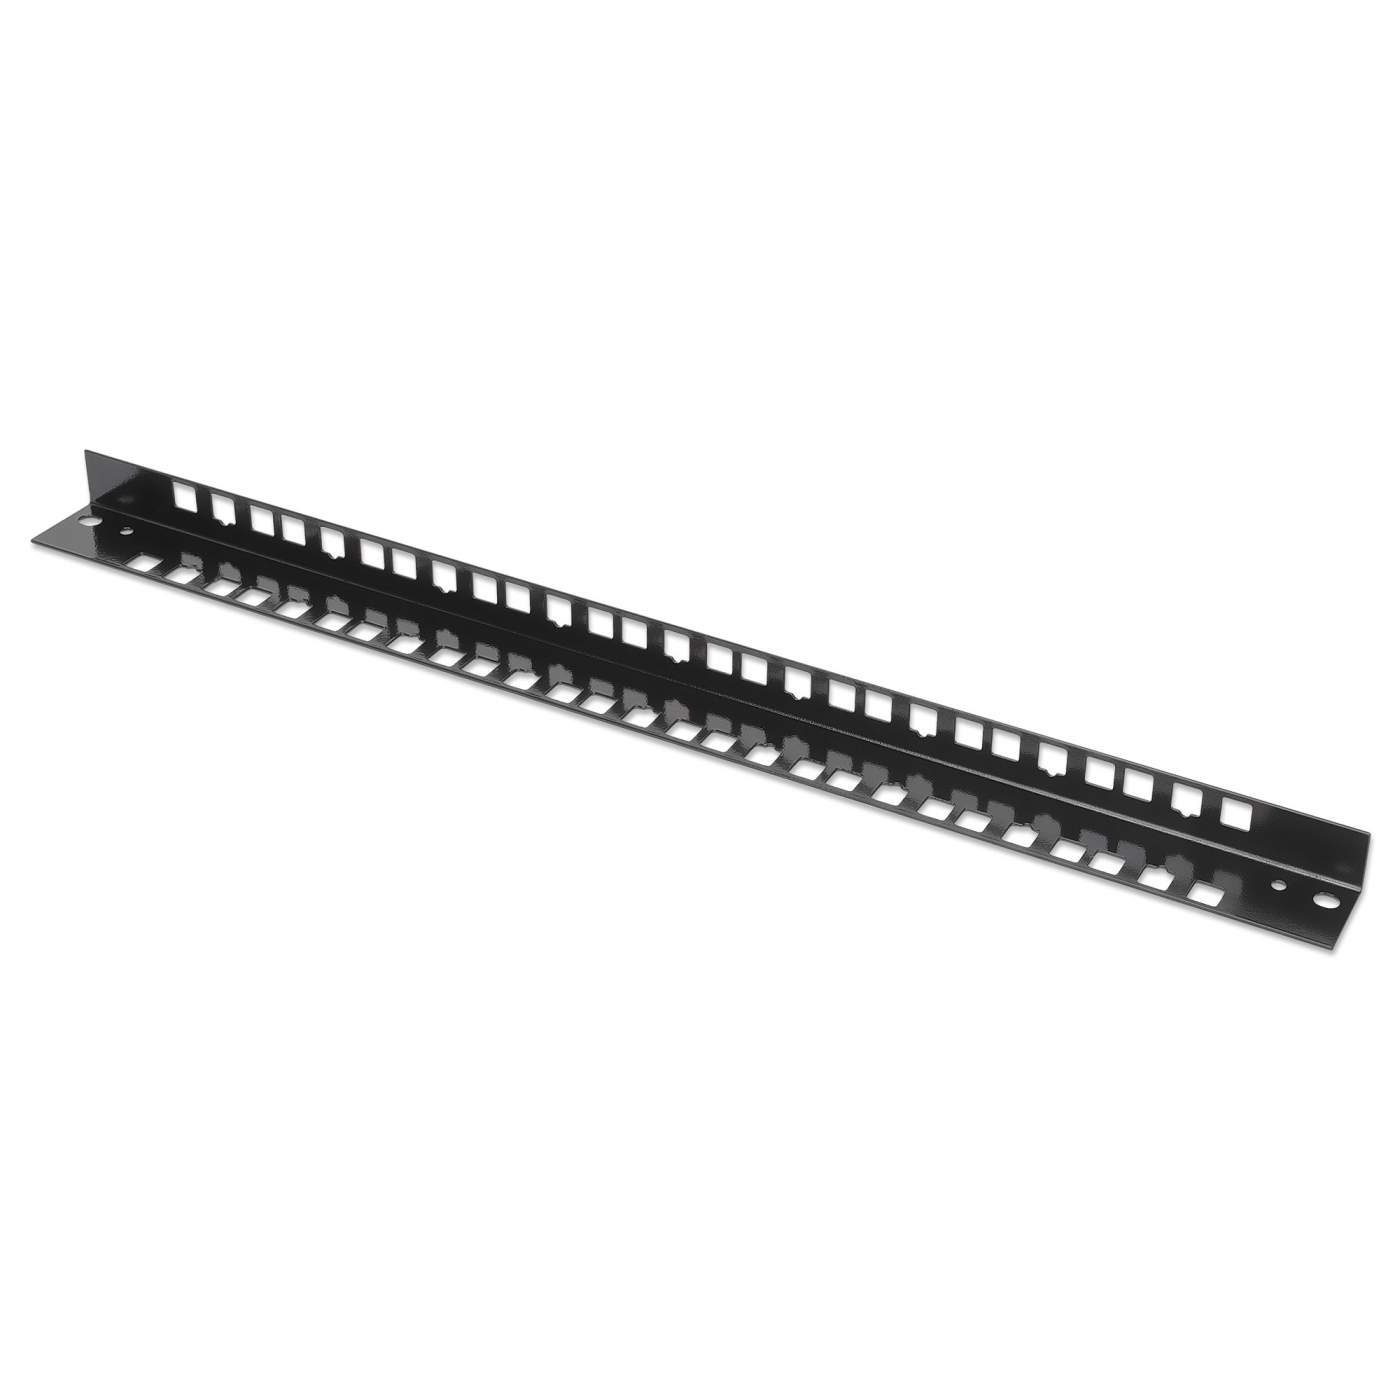 Spare Rails for 19" Wallmount Cabinets, 9U Image 1